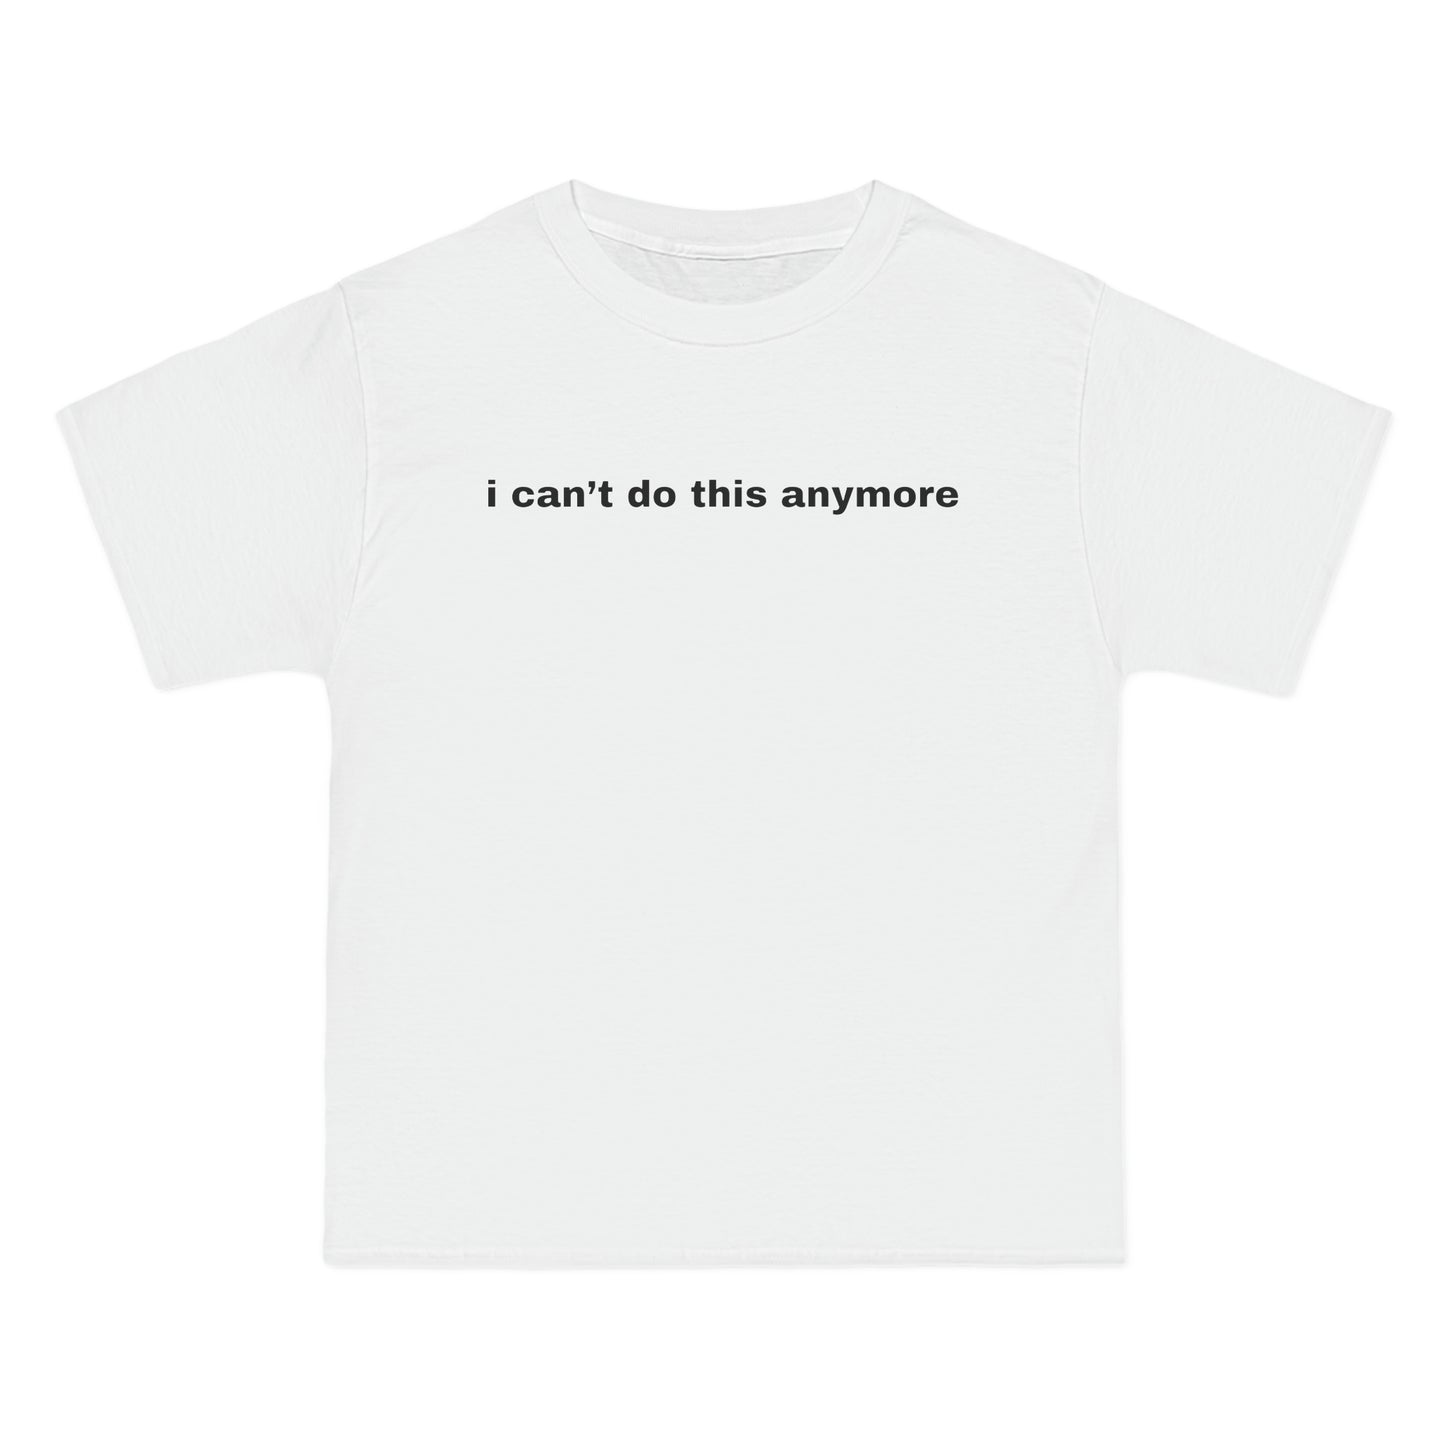 i can't do this anymore Tee